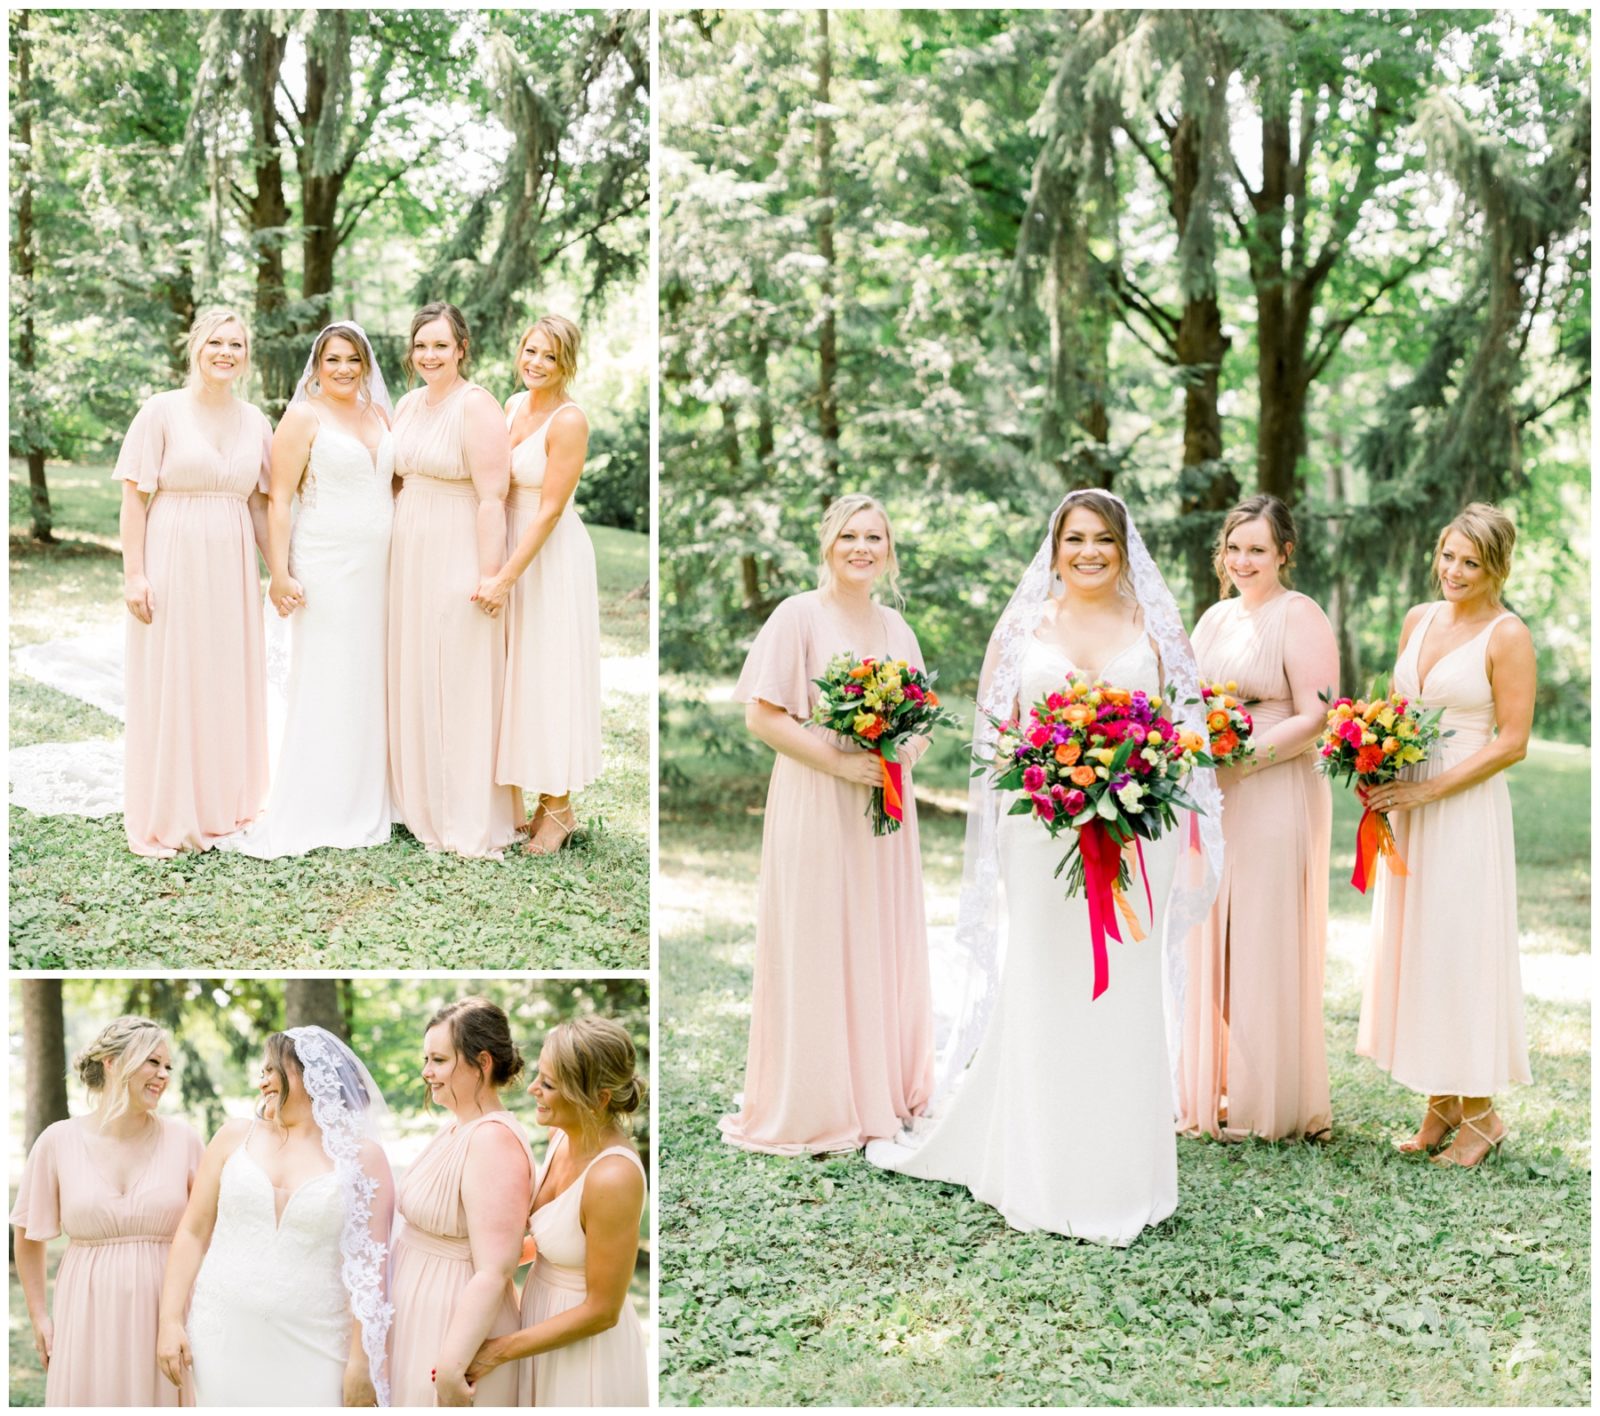 Pictures of the bride and bridesmaids.